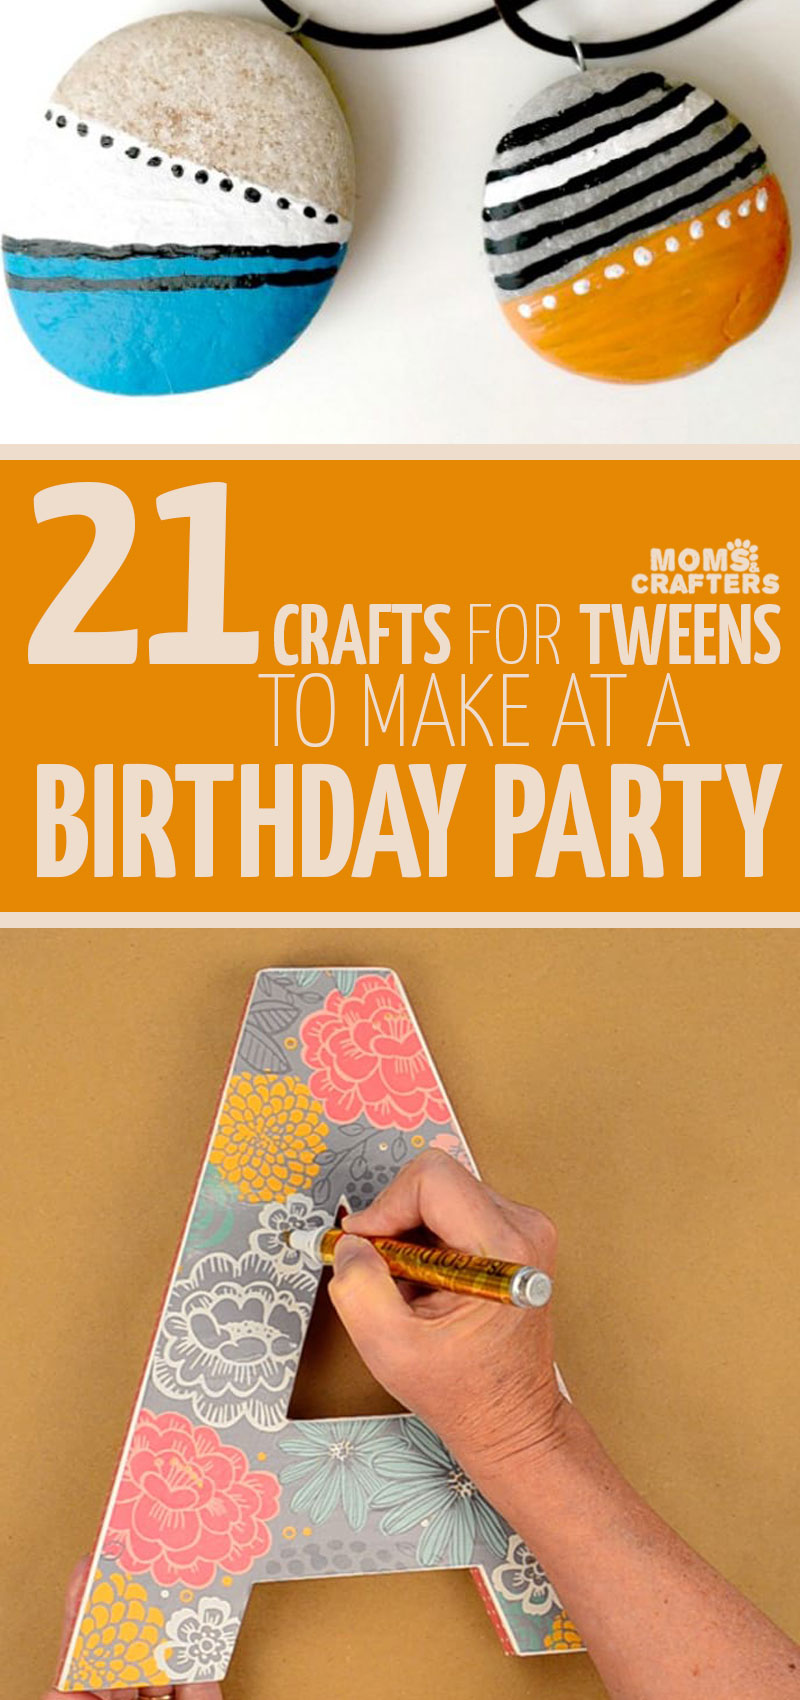 22 Cool Party crafts for teens and tweens * Moms and Crafters